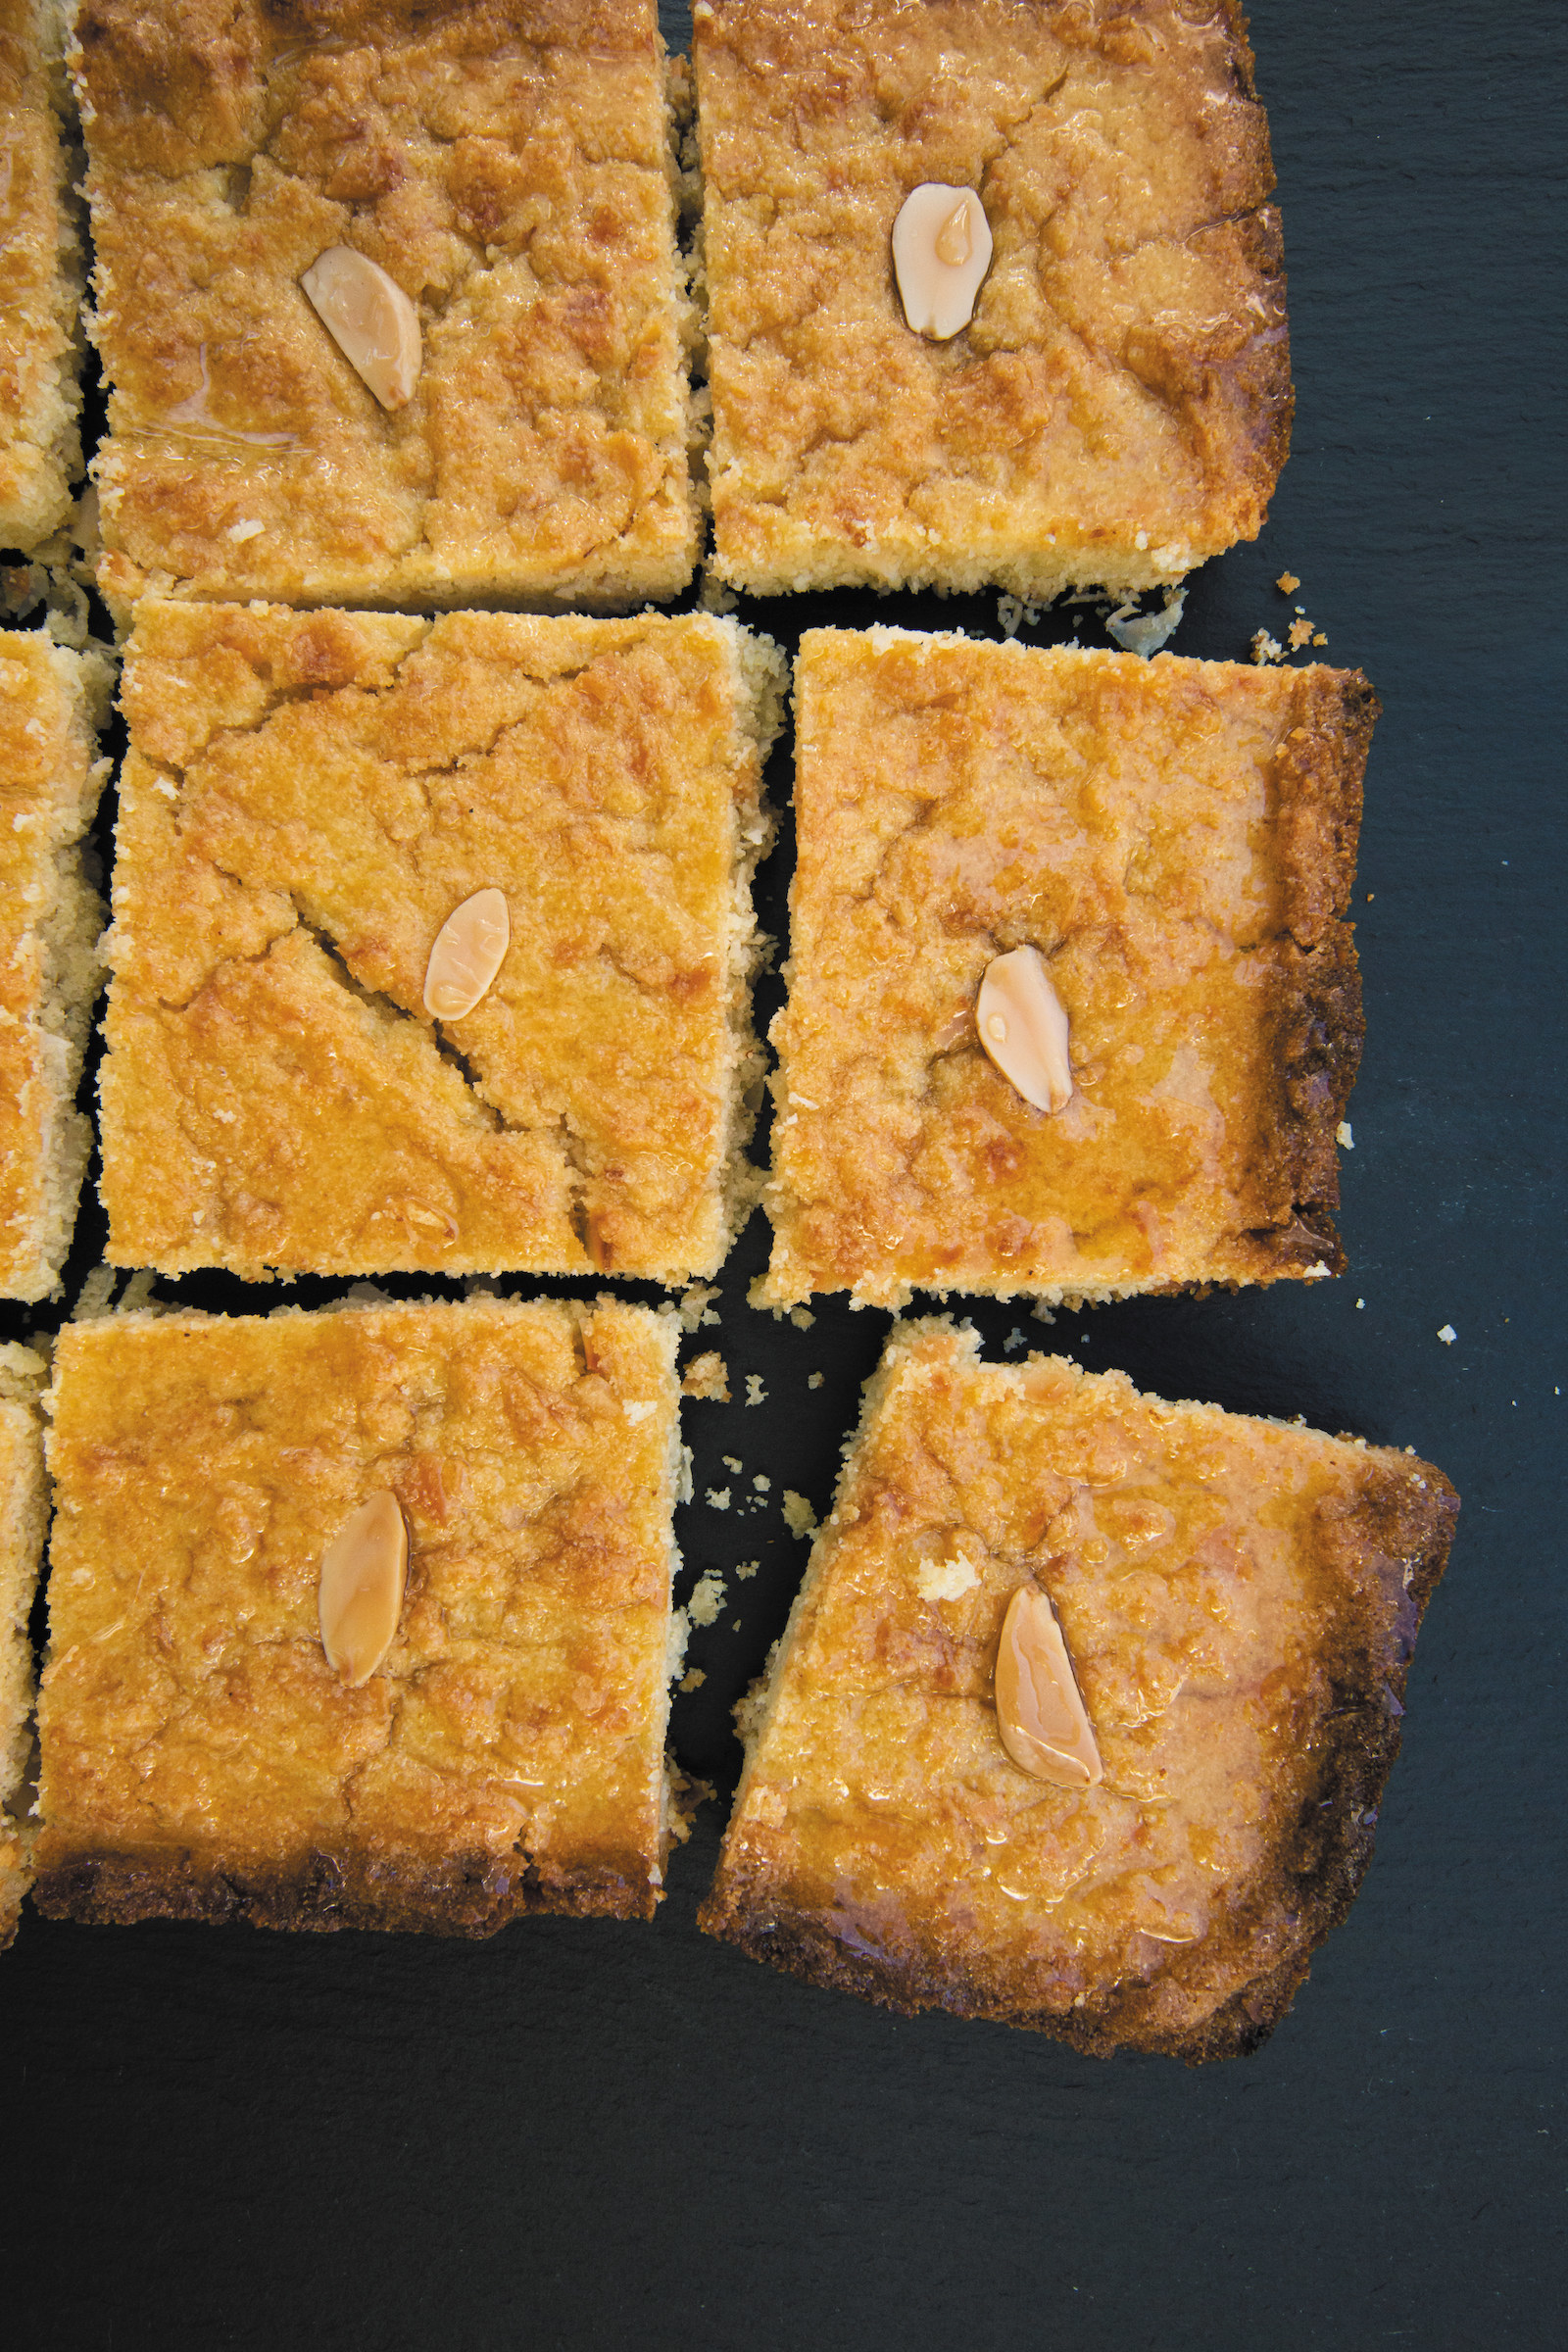 A photo of basbousa, a recipe from Mena&#x27;s mother featured in the book.